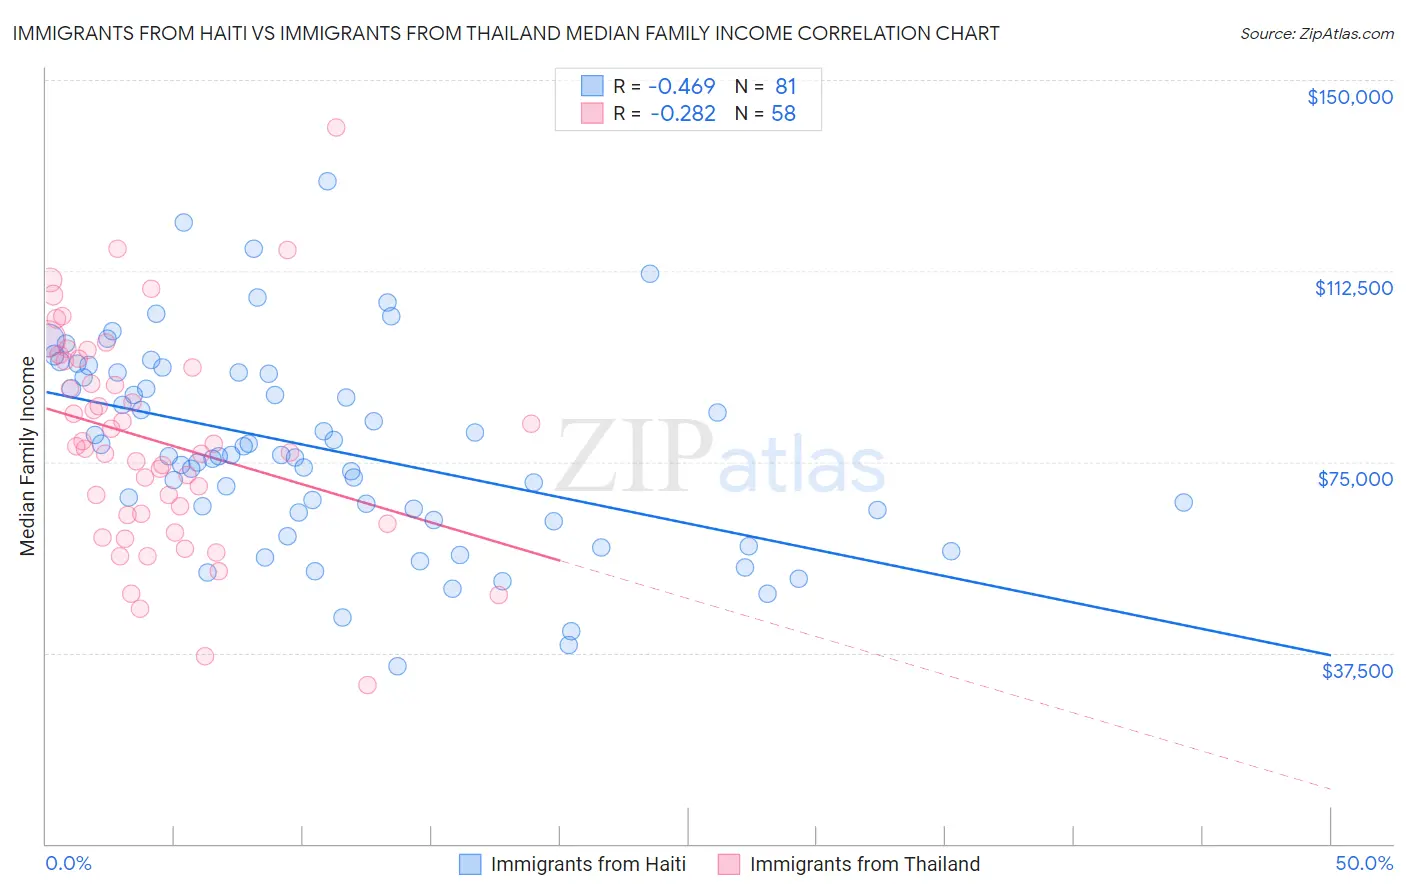 Immigrants from Haiti vs Immigrants from Thailand Median Family Income